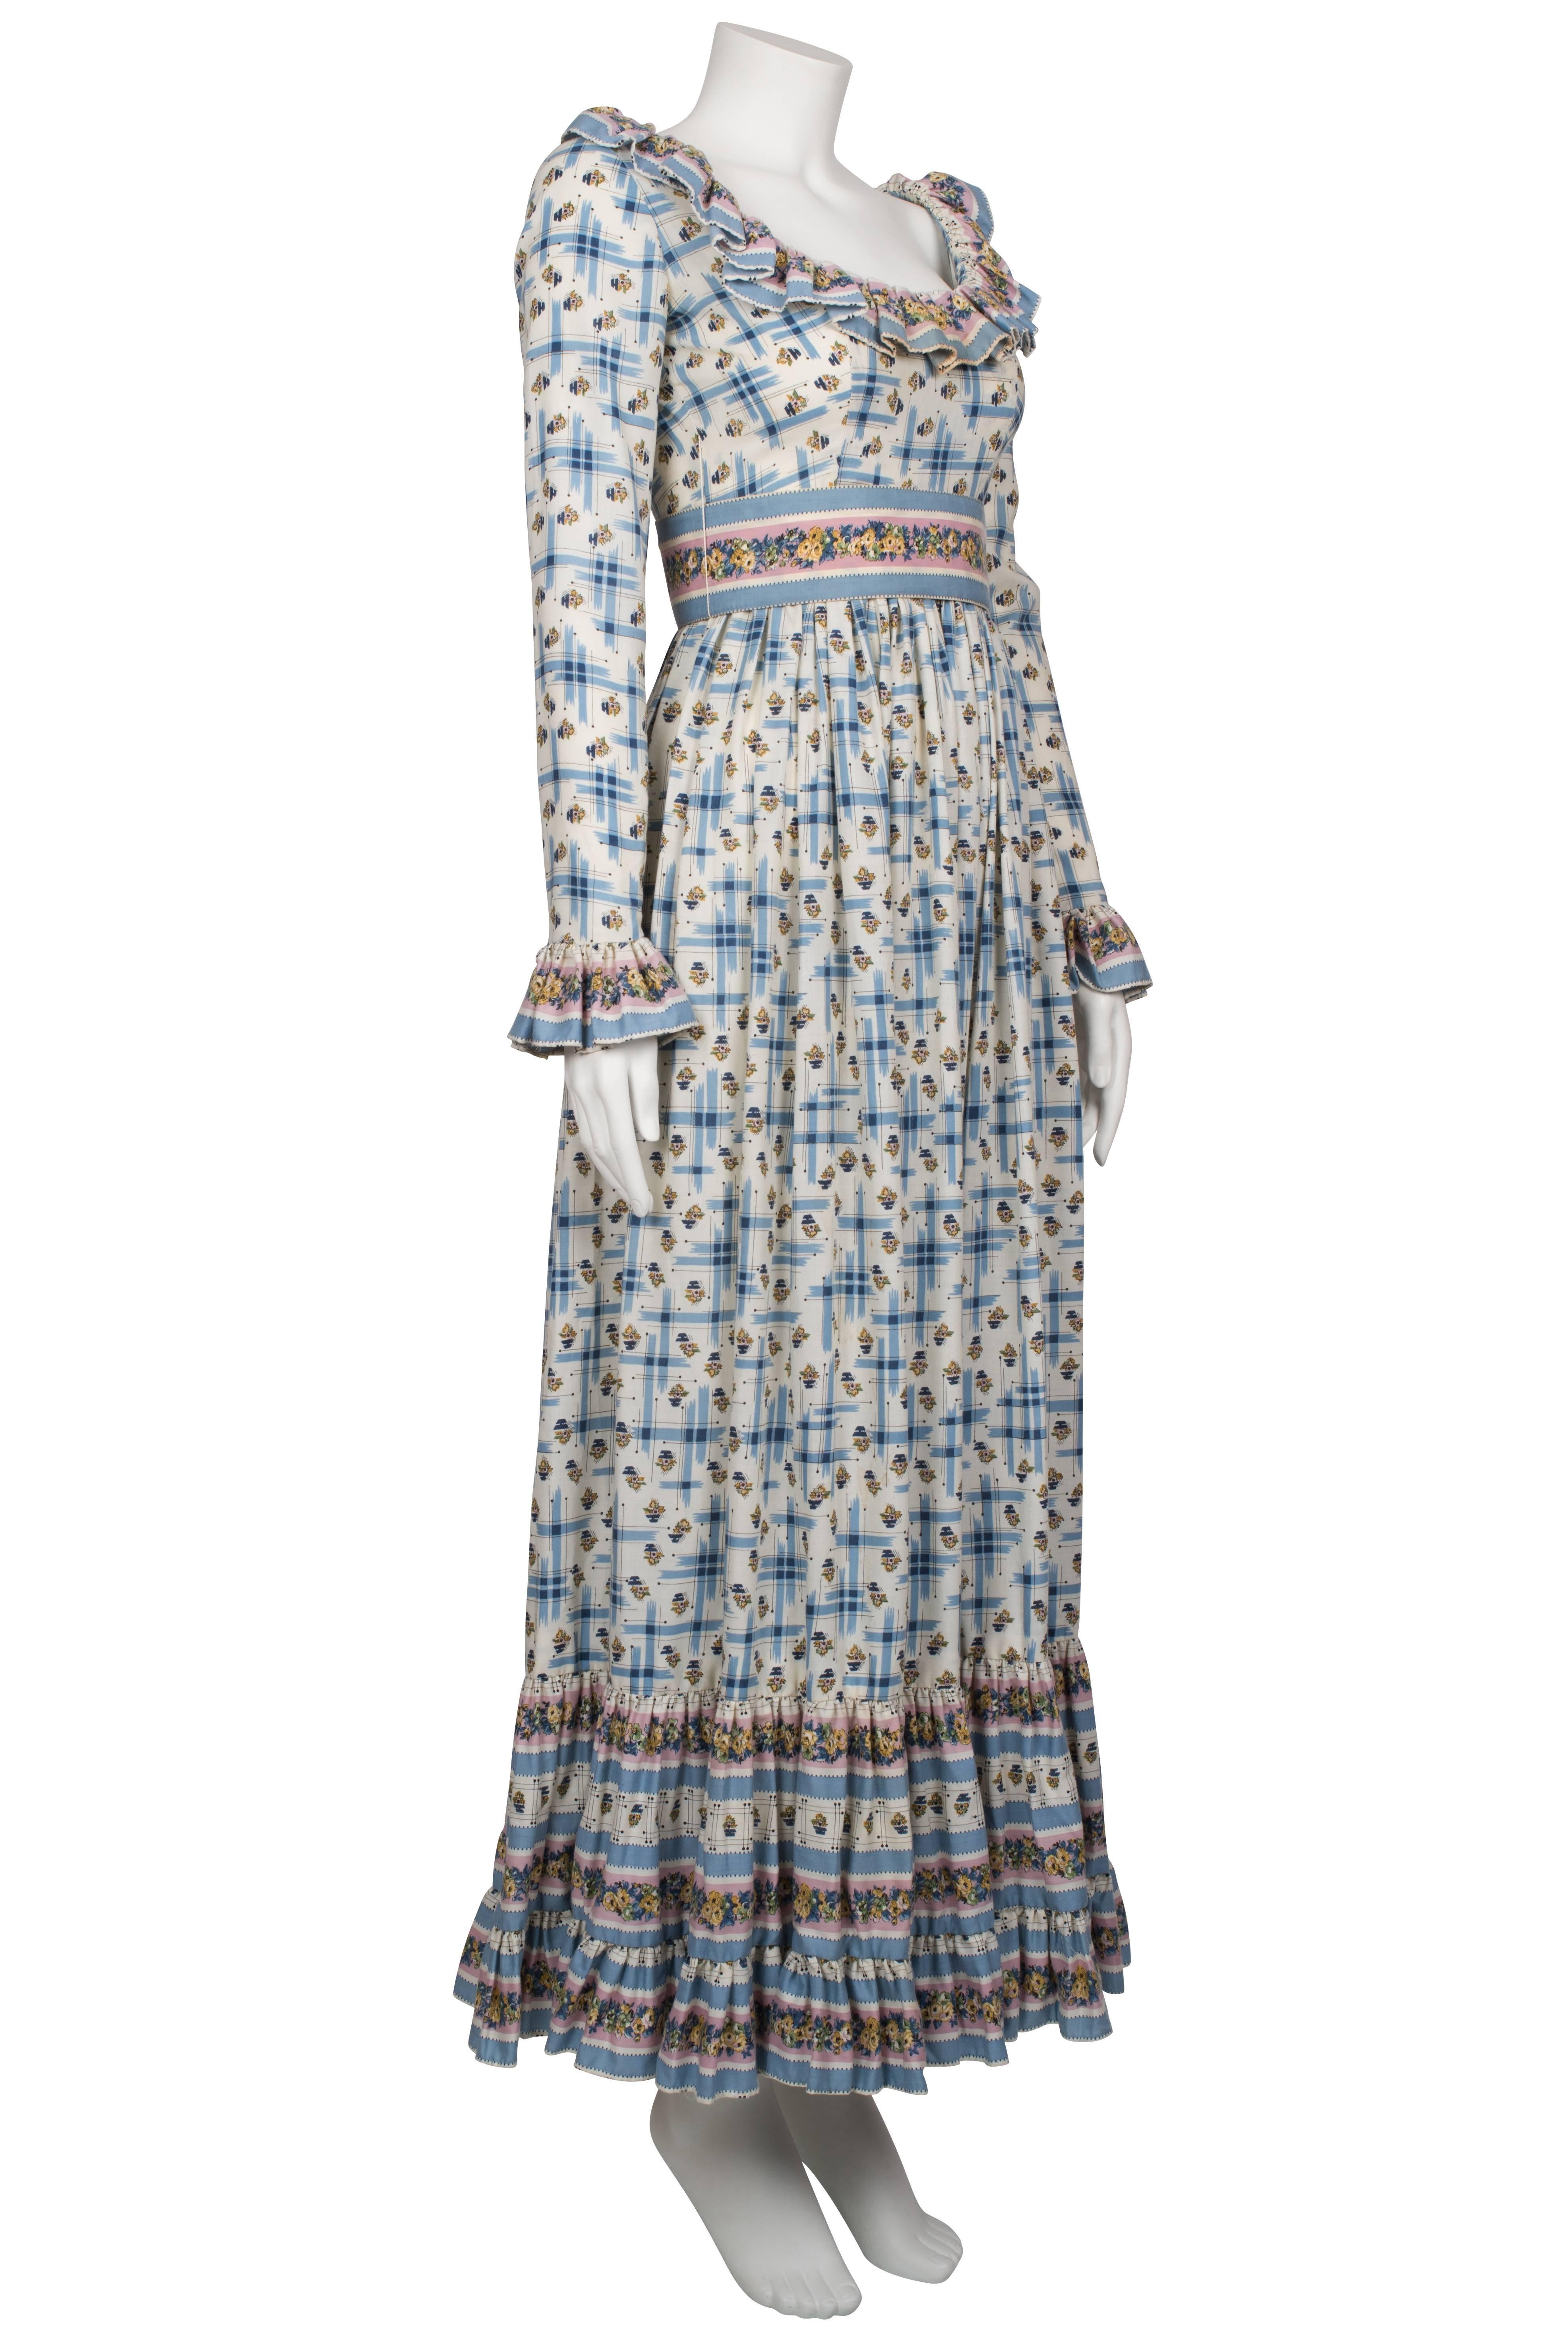 1970's Victor Costa Prairie Style Cotton Dress  In Excellent Condition For Sale In London, GB